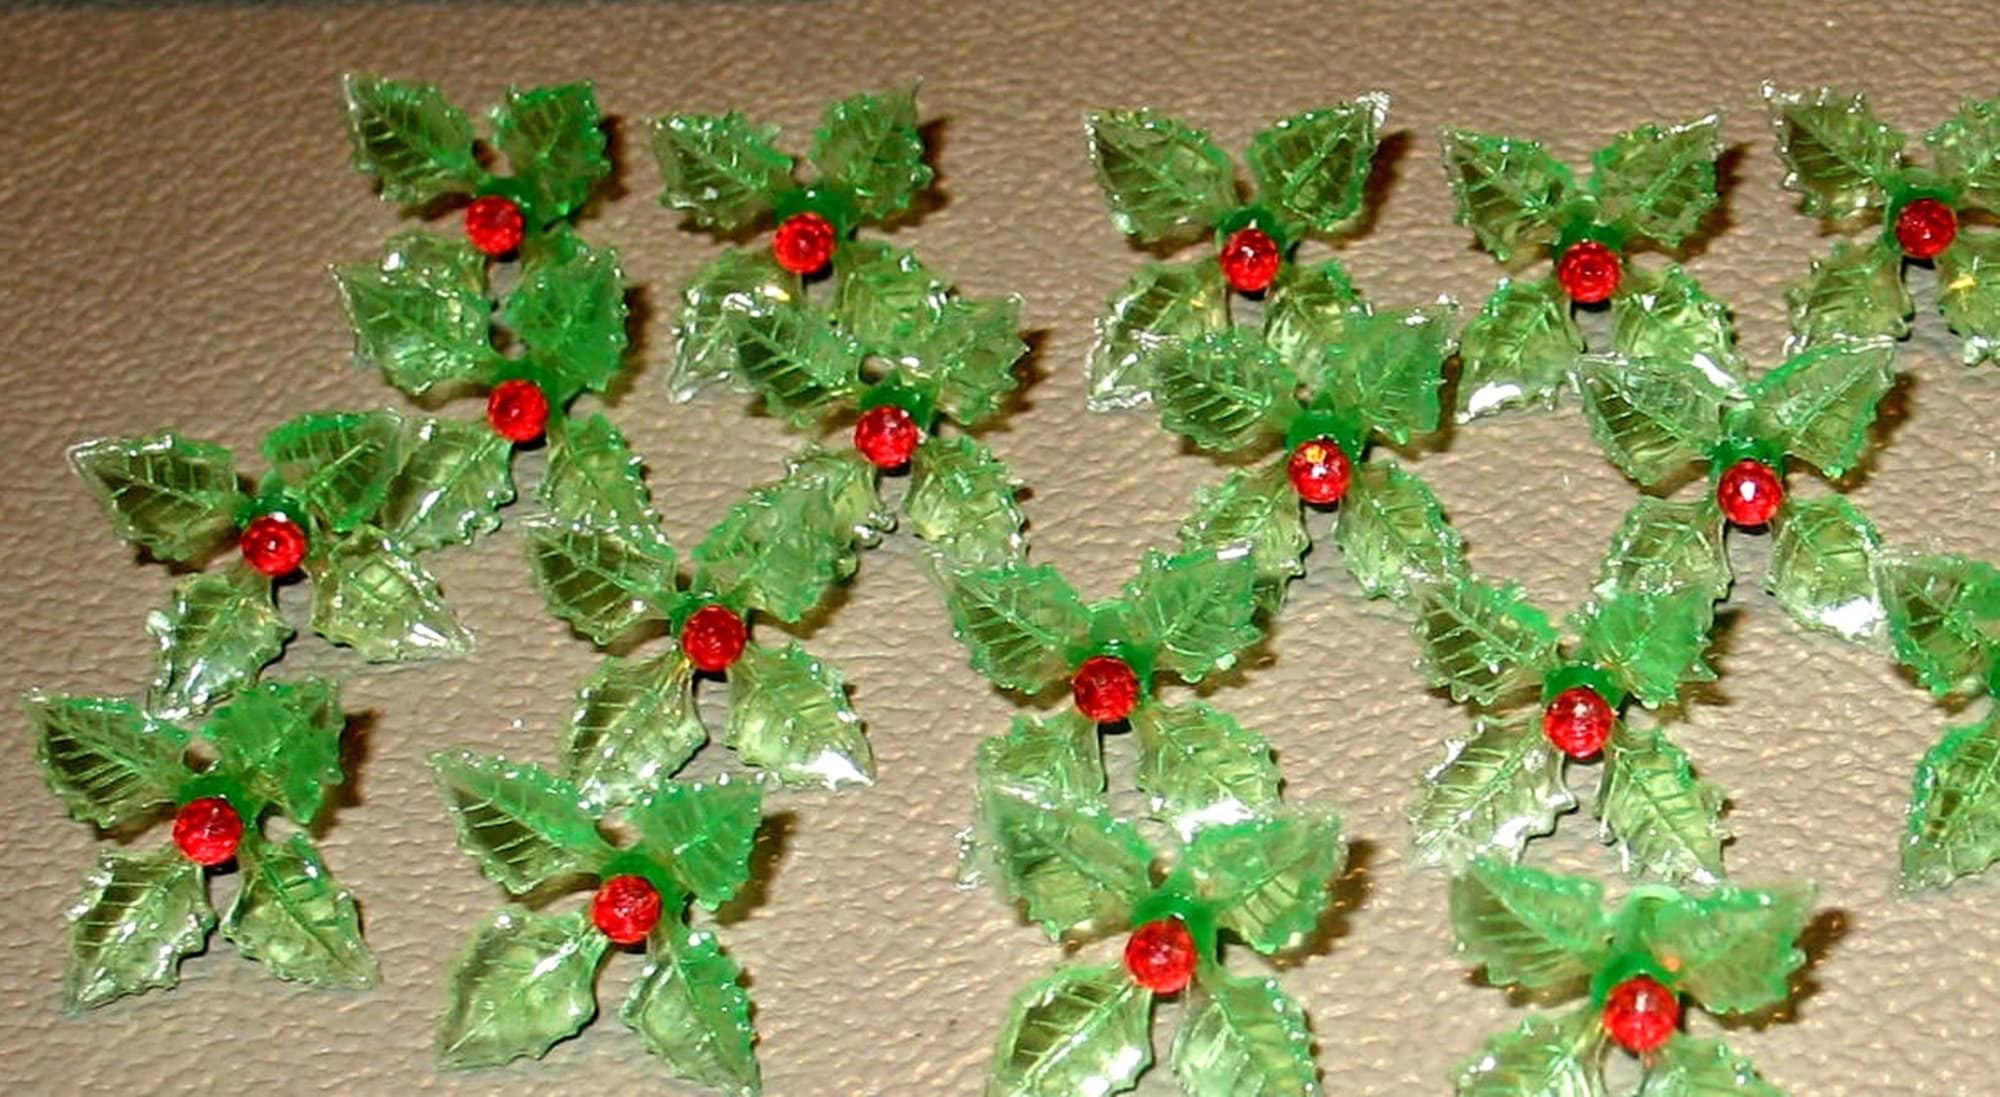 CBC Poinsettia Red and Holly Green Glitter Paper CBC Poinsettia Red and  Holly Green G23004, G23004, Poinsettia Red, Holly Green, Glitter Paper  [PoinsettiaRed/HollyGreen Glitter] - $6.99 : Creek Bank Creations, Inc. 